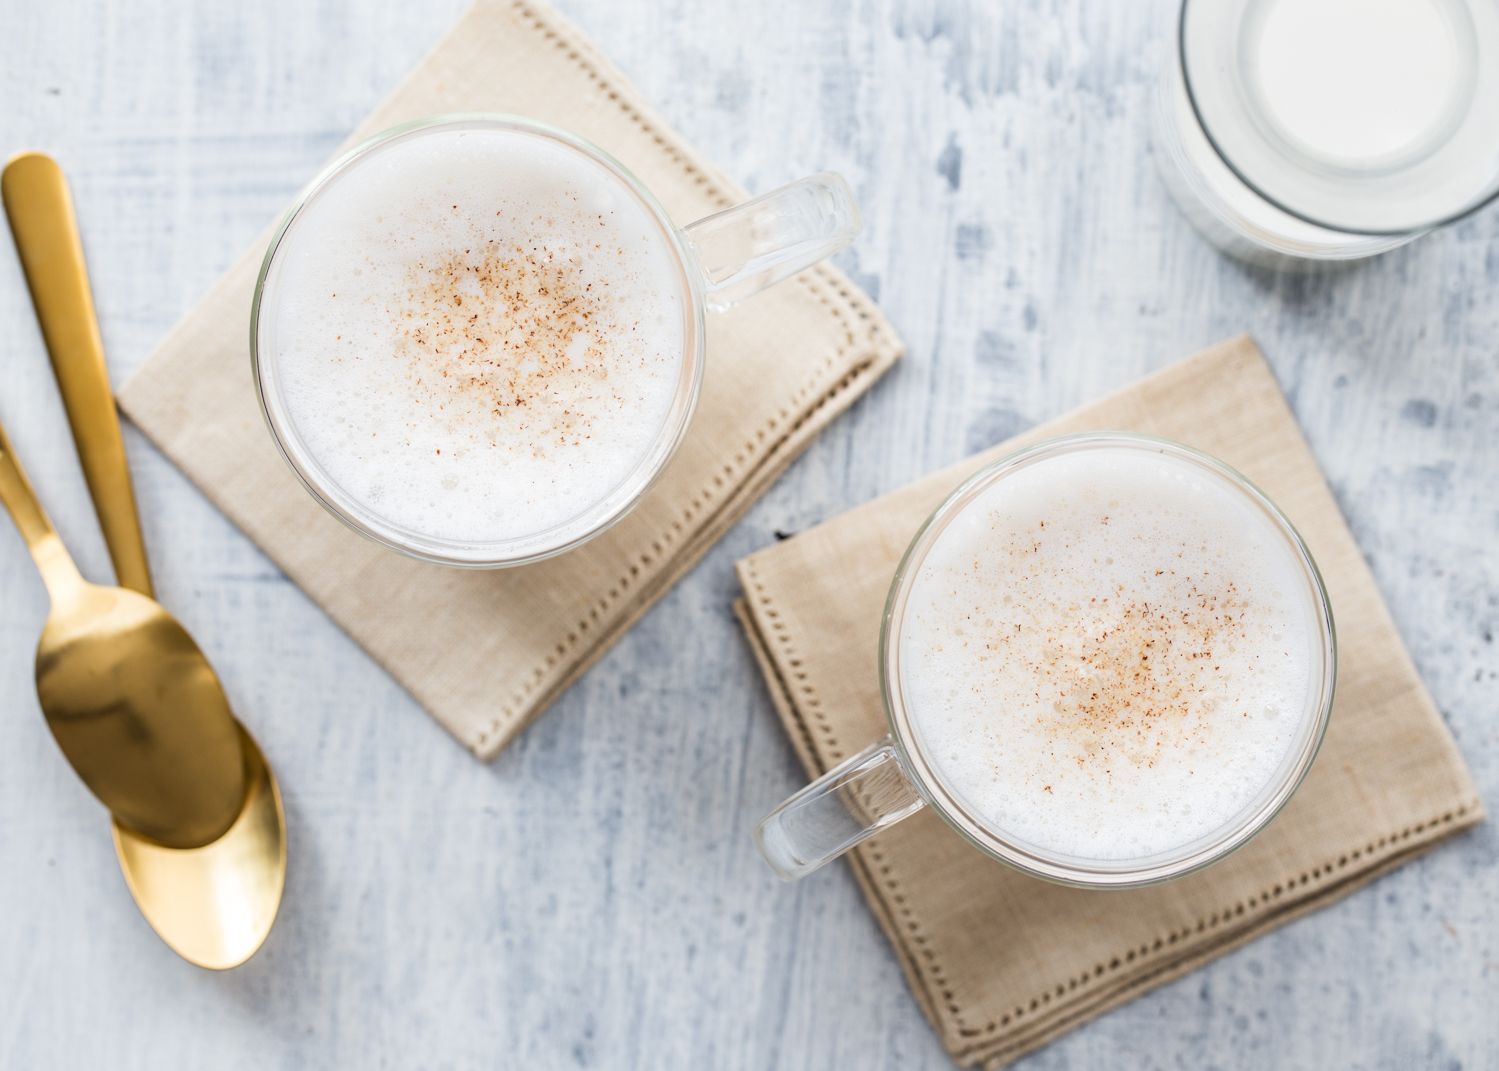 Holiday cocktails and mocktails: Try this super rich and delicious Milk Punch Two Ways from Jelly Toast. It's the ultimate crowd pleaser!